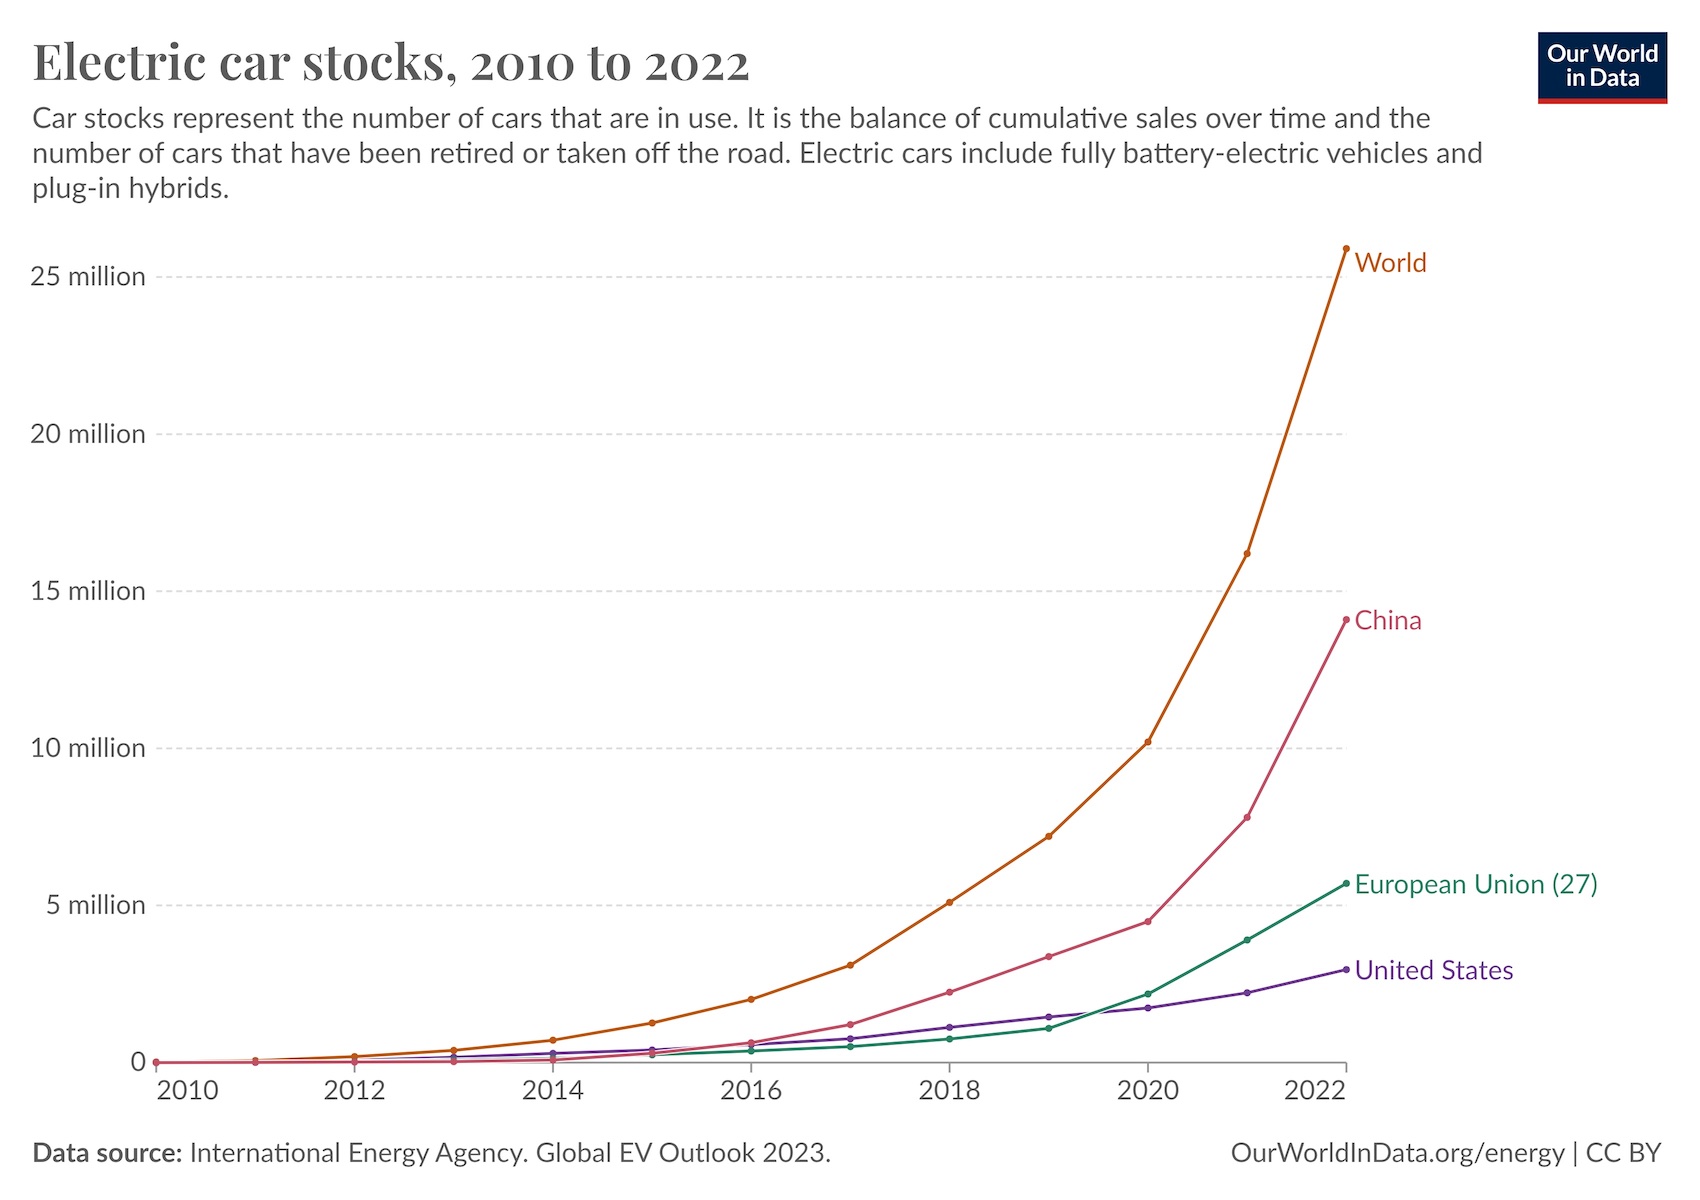 Electric vehicle adoption trends from 2010 to 2022, showing significant growth worldwide, with notable increases in china, the european union, and the united states.